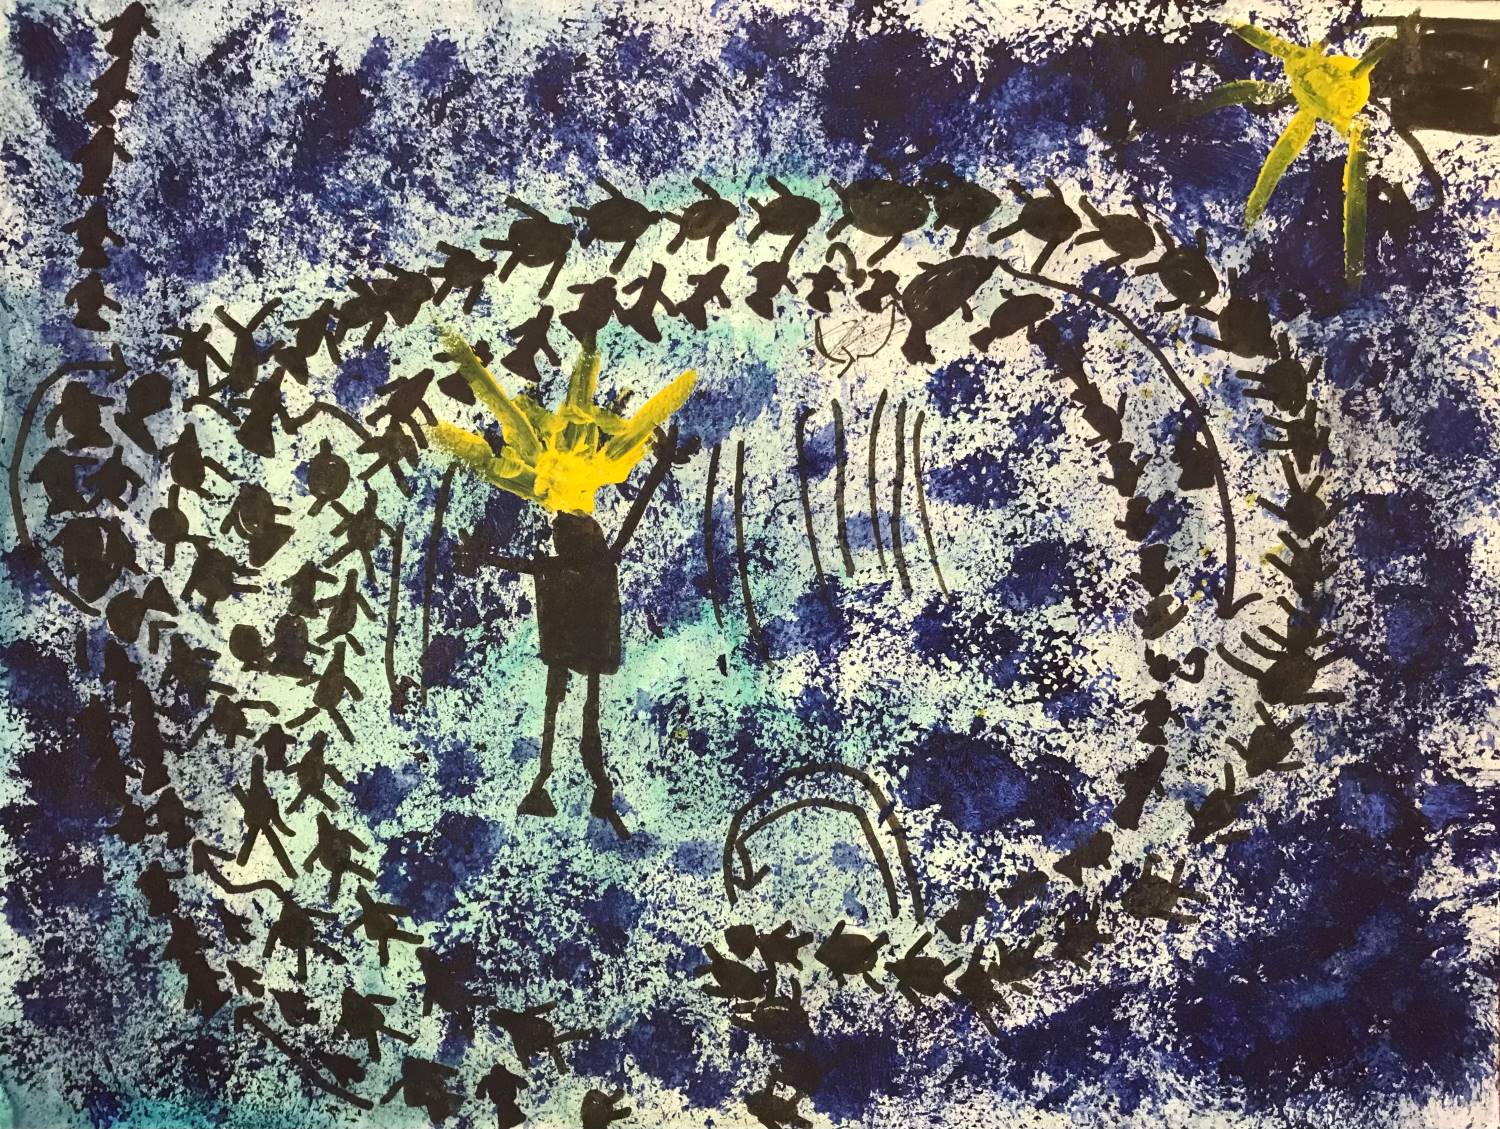 A person with a head like a bright star is standing in the darkness surrounded by a sircle of fish. Another light is in the corner of the drawing.